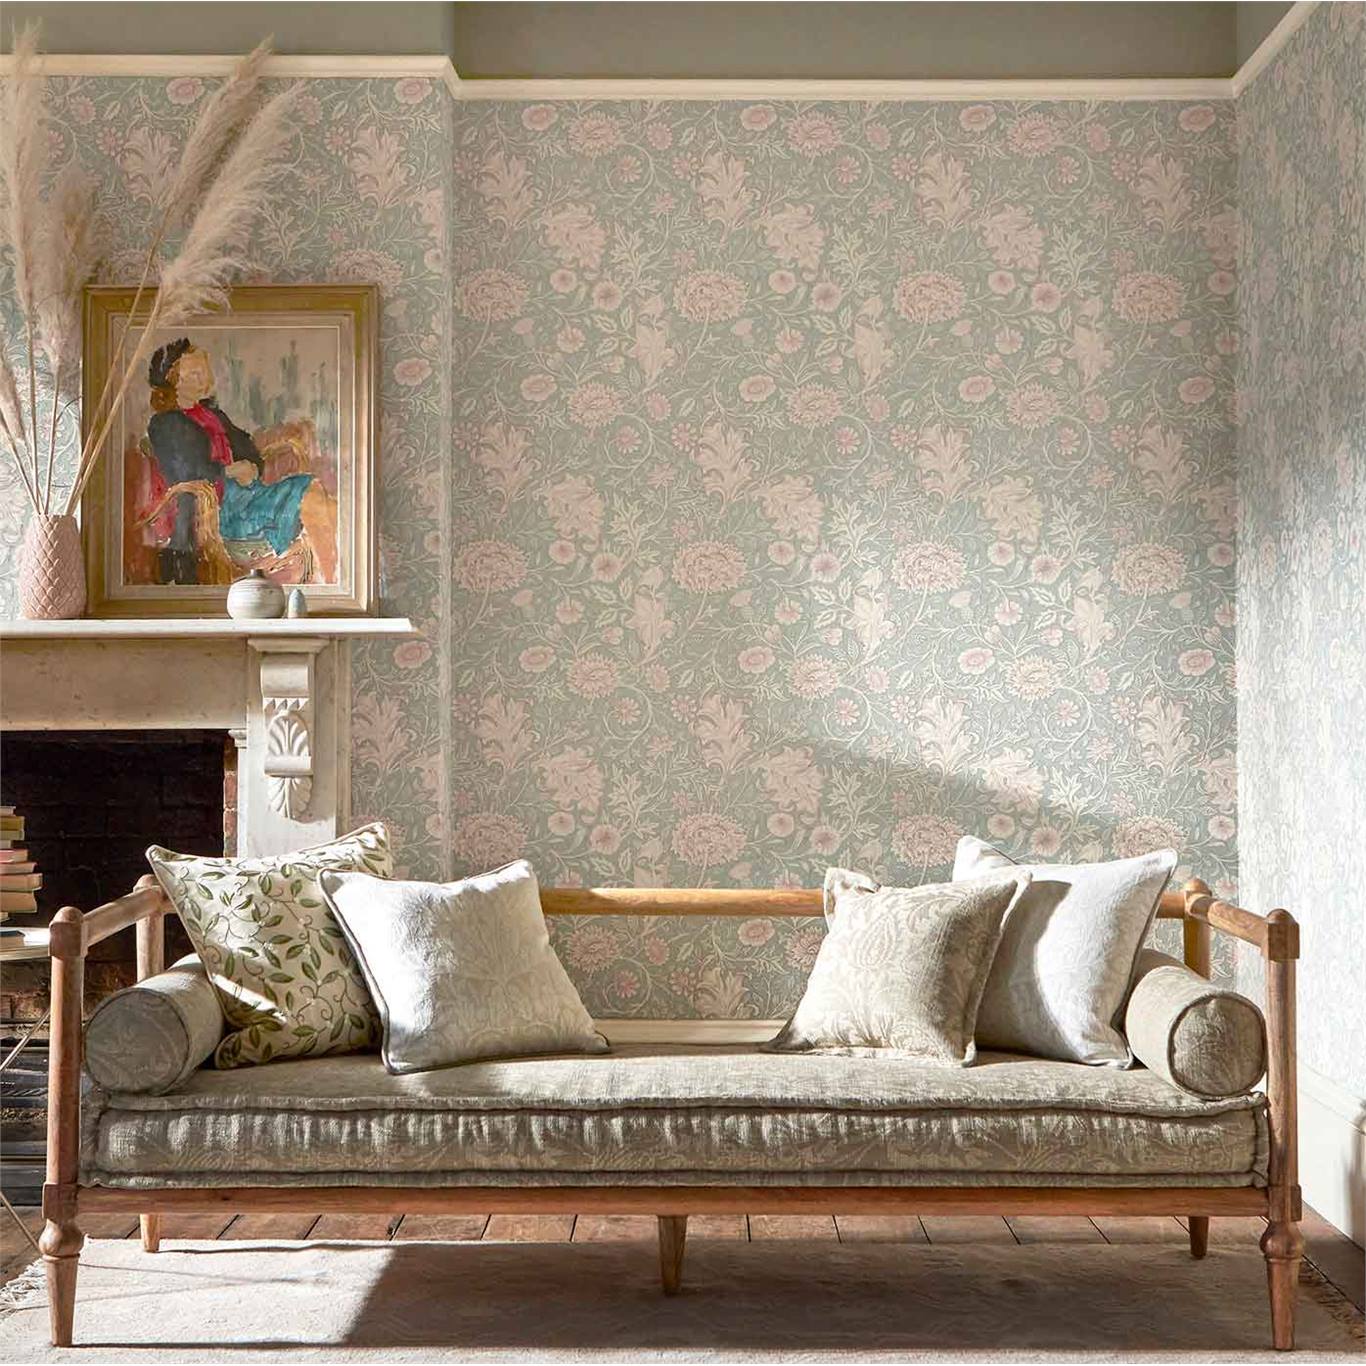 Double Bough, A Wallpaper By Morris & Co - William Morris Wallpaper Interior - HD Wallpaper 